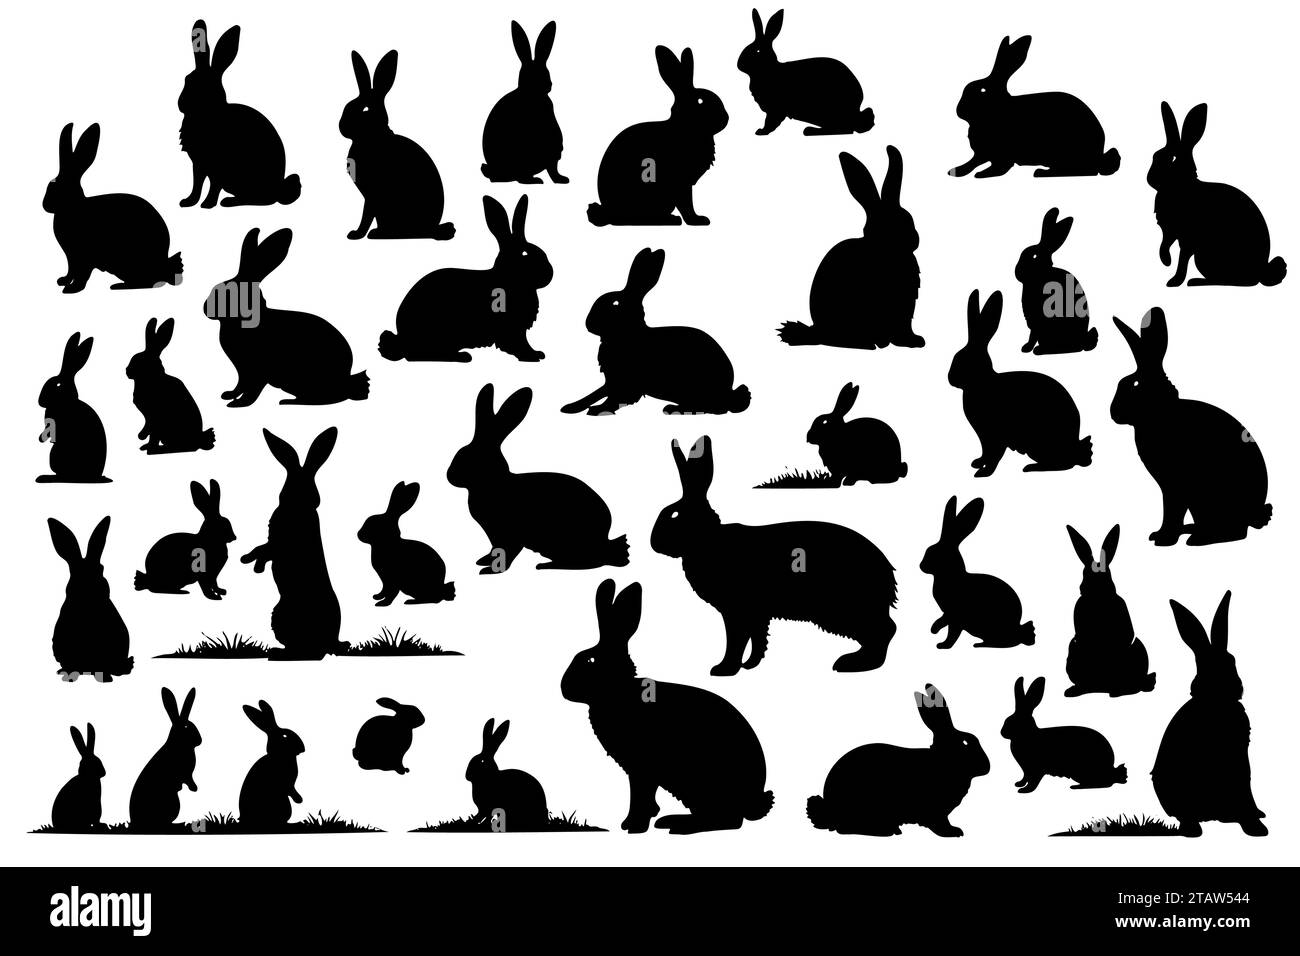 Collection of different silhouettes of black Easter bunnies Stock Vector